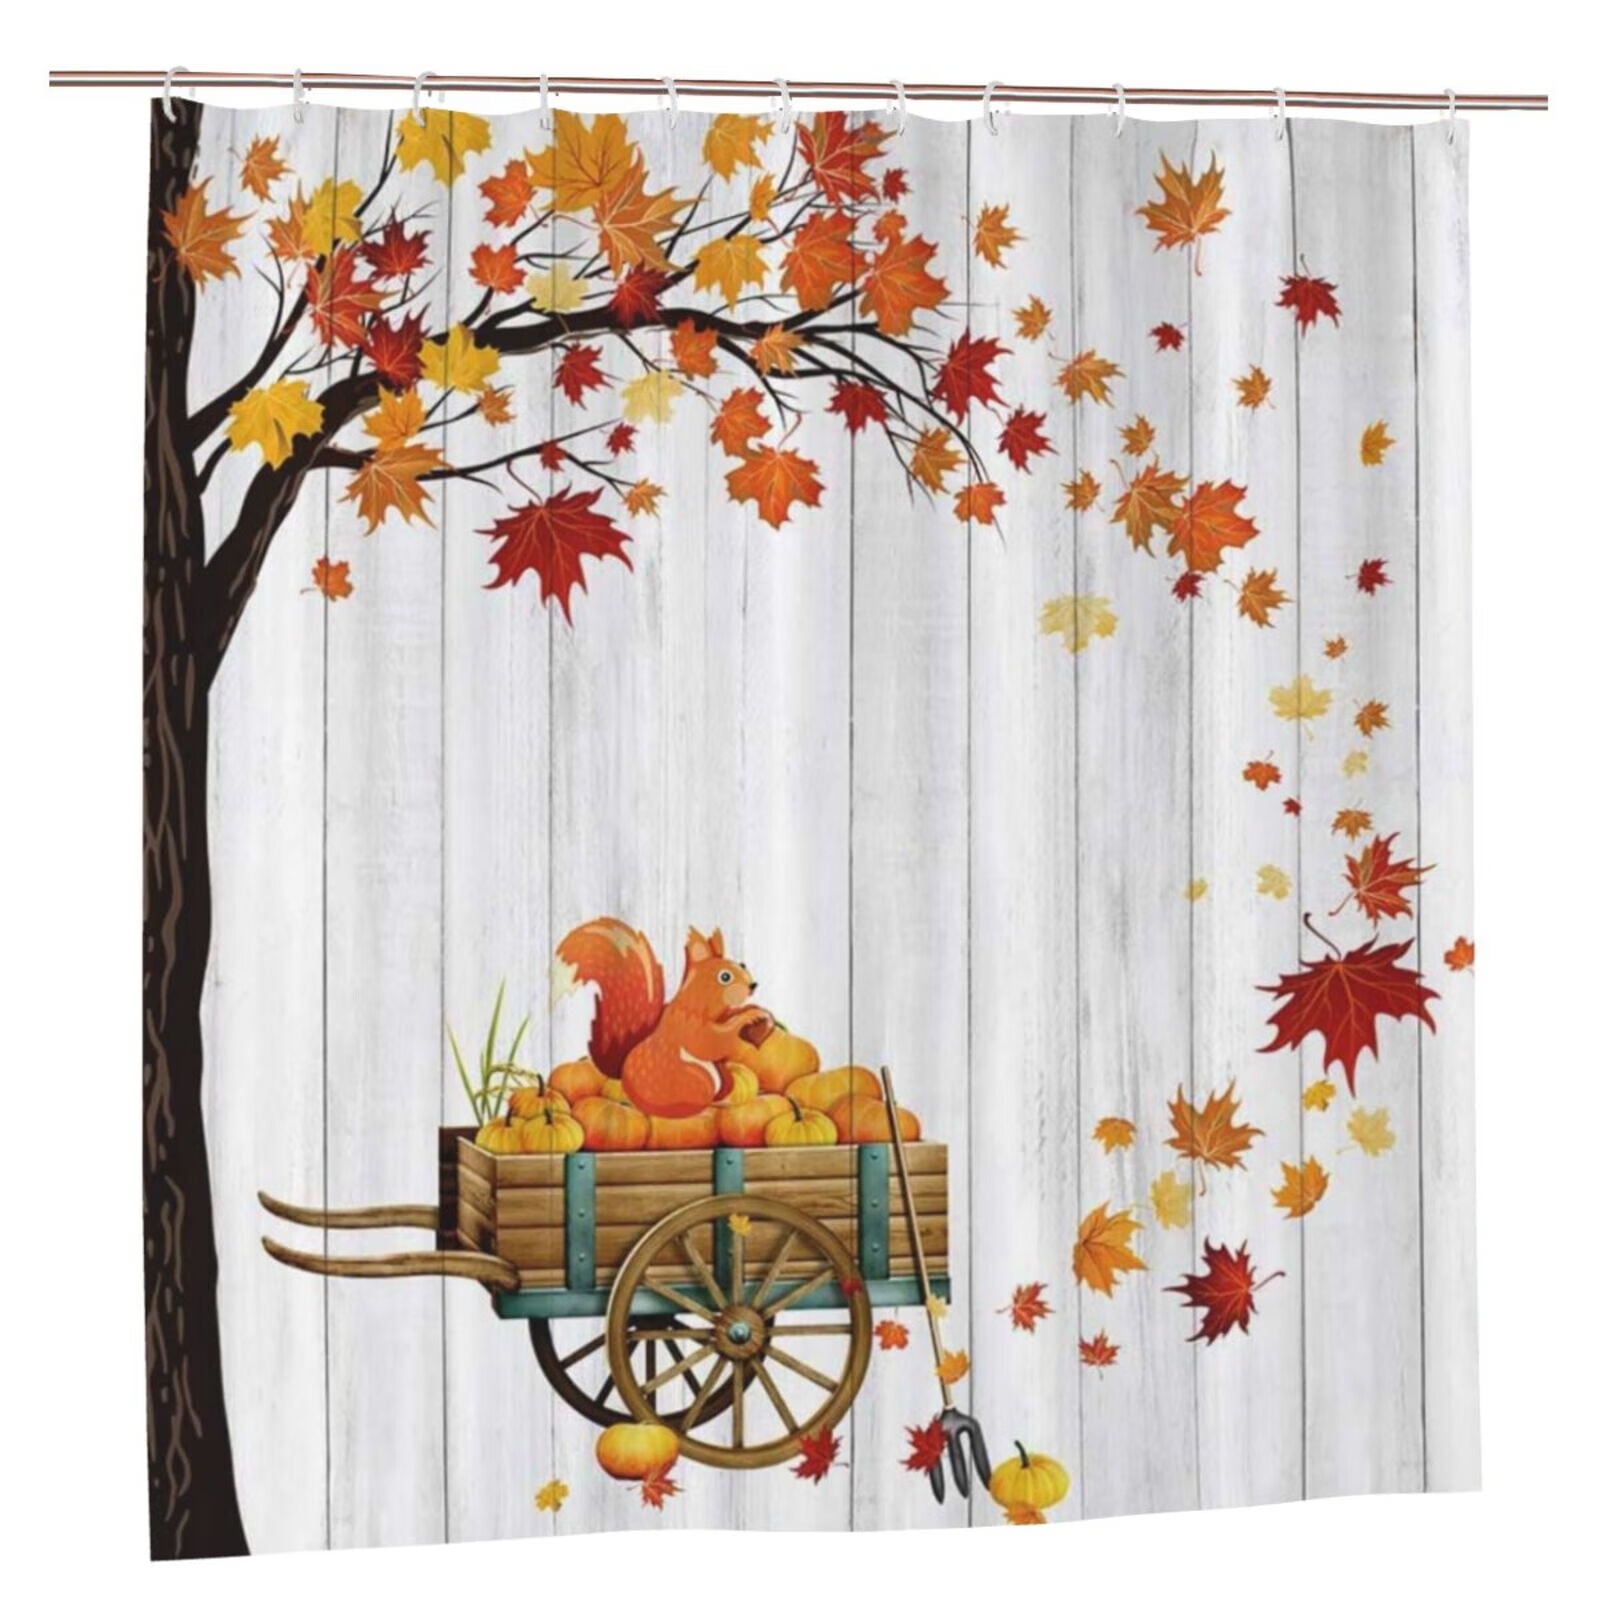  Fall Shower Curtain Set, Harvest Pumpkin Truck Bath Shower  Curtain with Hooks Waterproof Polyester Fabric Shower Curtains for Bathroom  Holiday Thanksgiving Decorations Flowers Maple Leaf 36x72 Inch : Home &  Kitchen